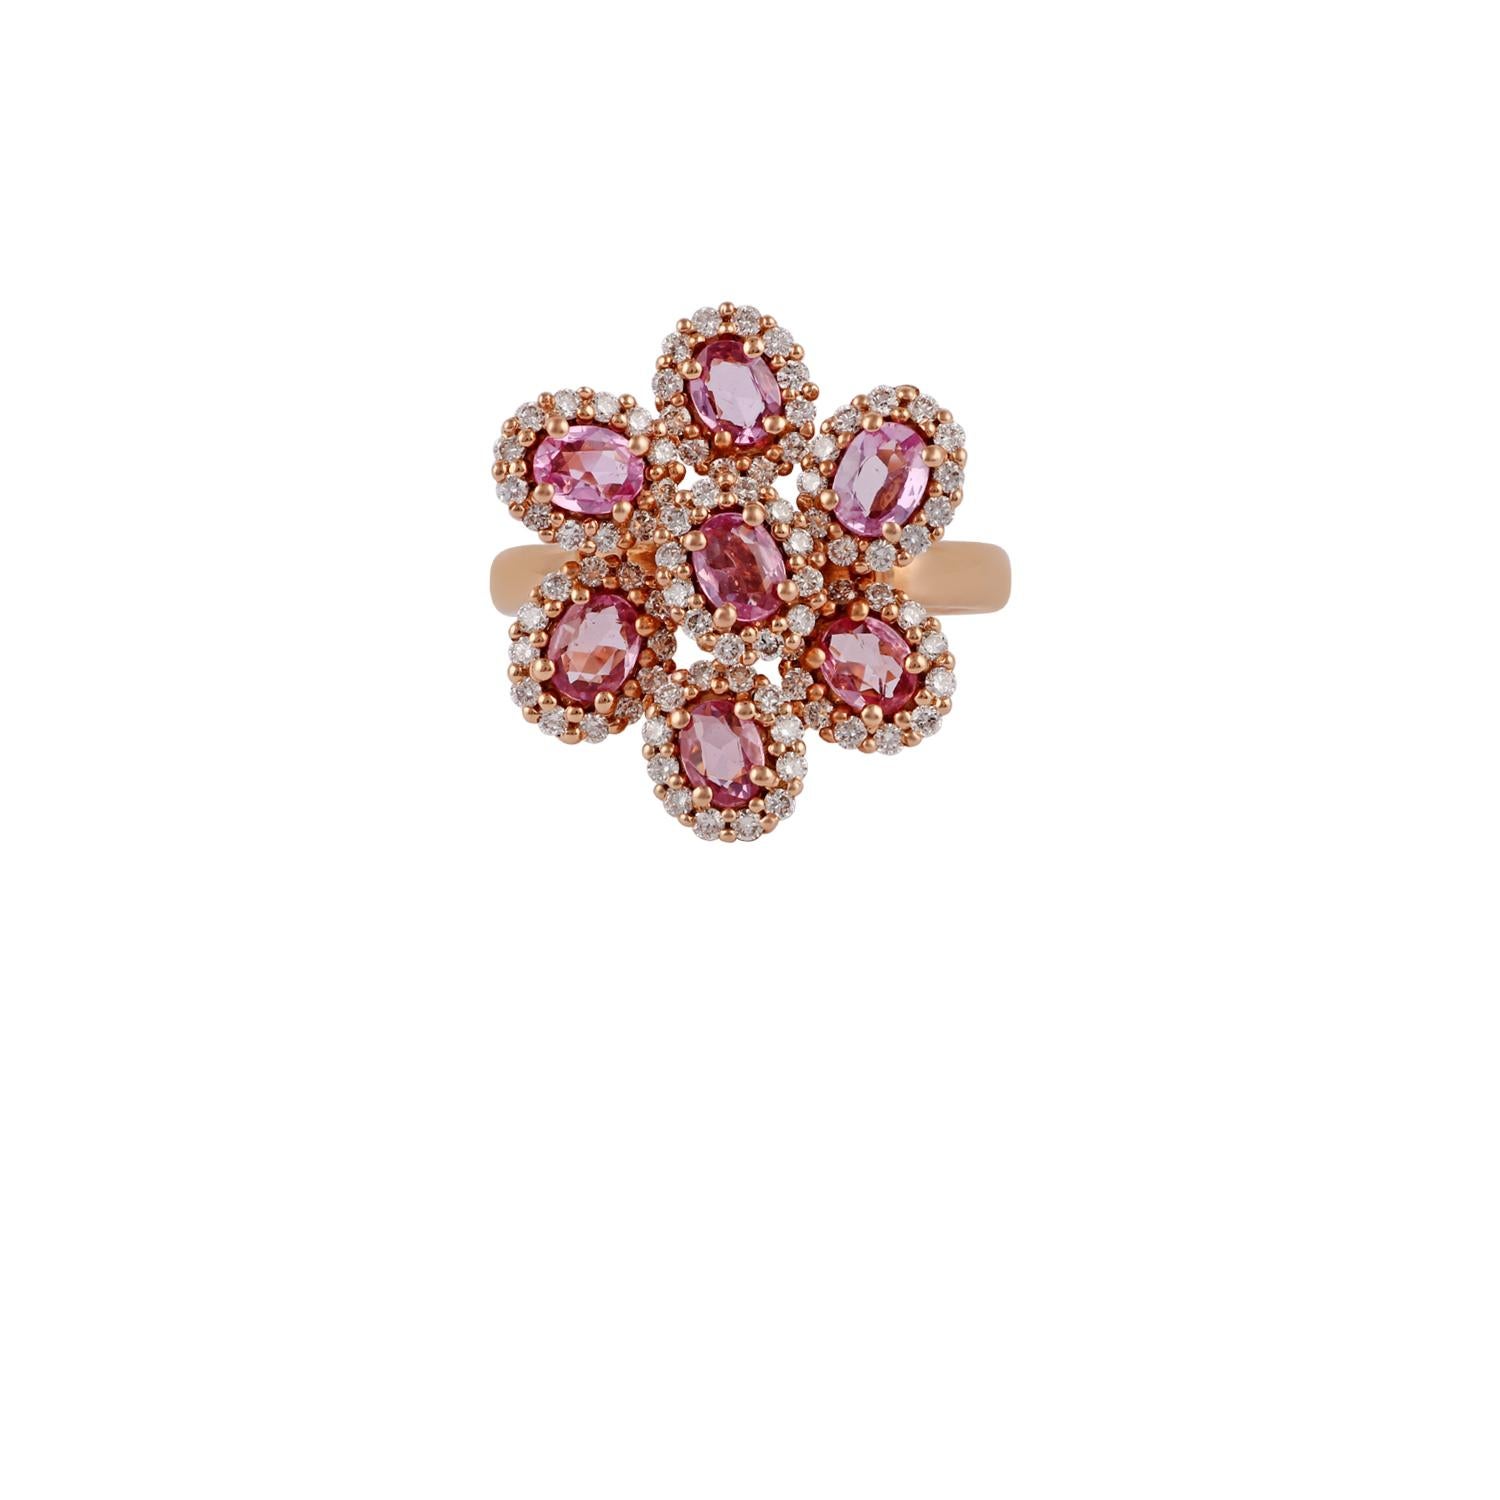 This is a designer floral pattern ring studded in 18k rose gold with 7 pieces of pink sapphires weight 1.34 carat with round shaped diamond weight 0.60 carat, this entire ring is studded in 18k rose gold weight 6.55 grams, in this ring size can be